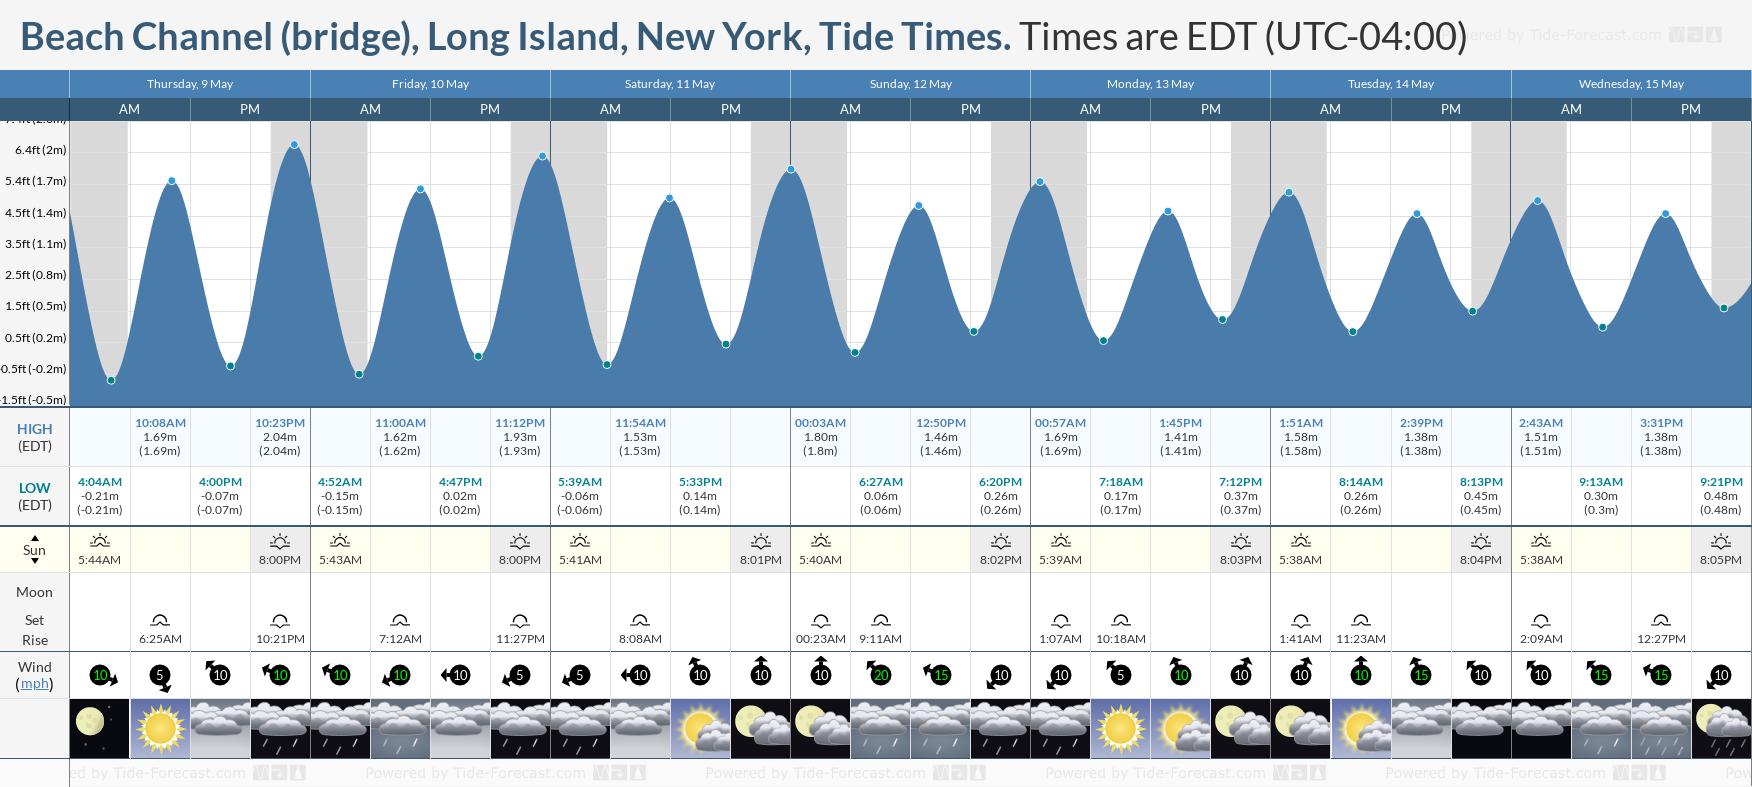 Beach Channel (bridge), Long Island, New York Tide Chart including high and low tide tide times for the next 7 days